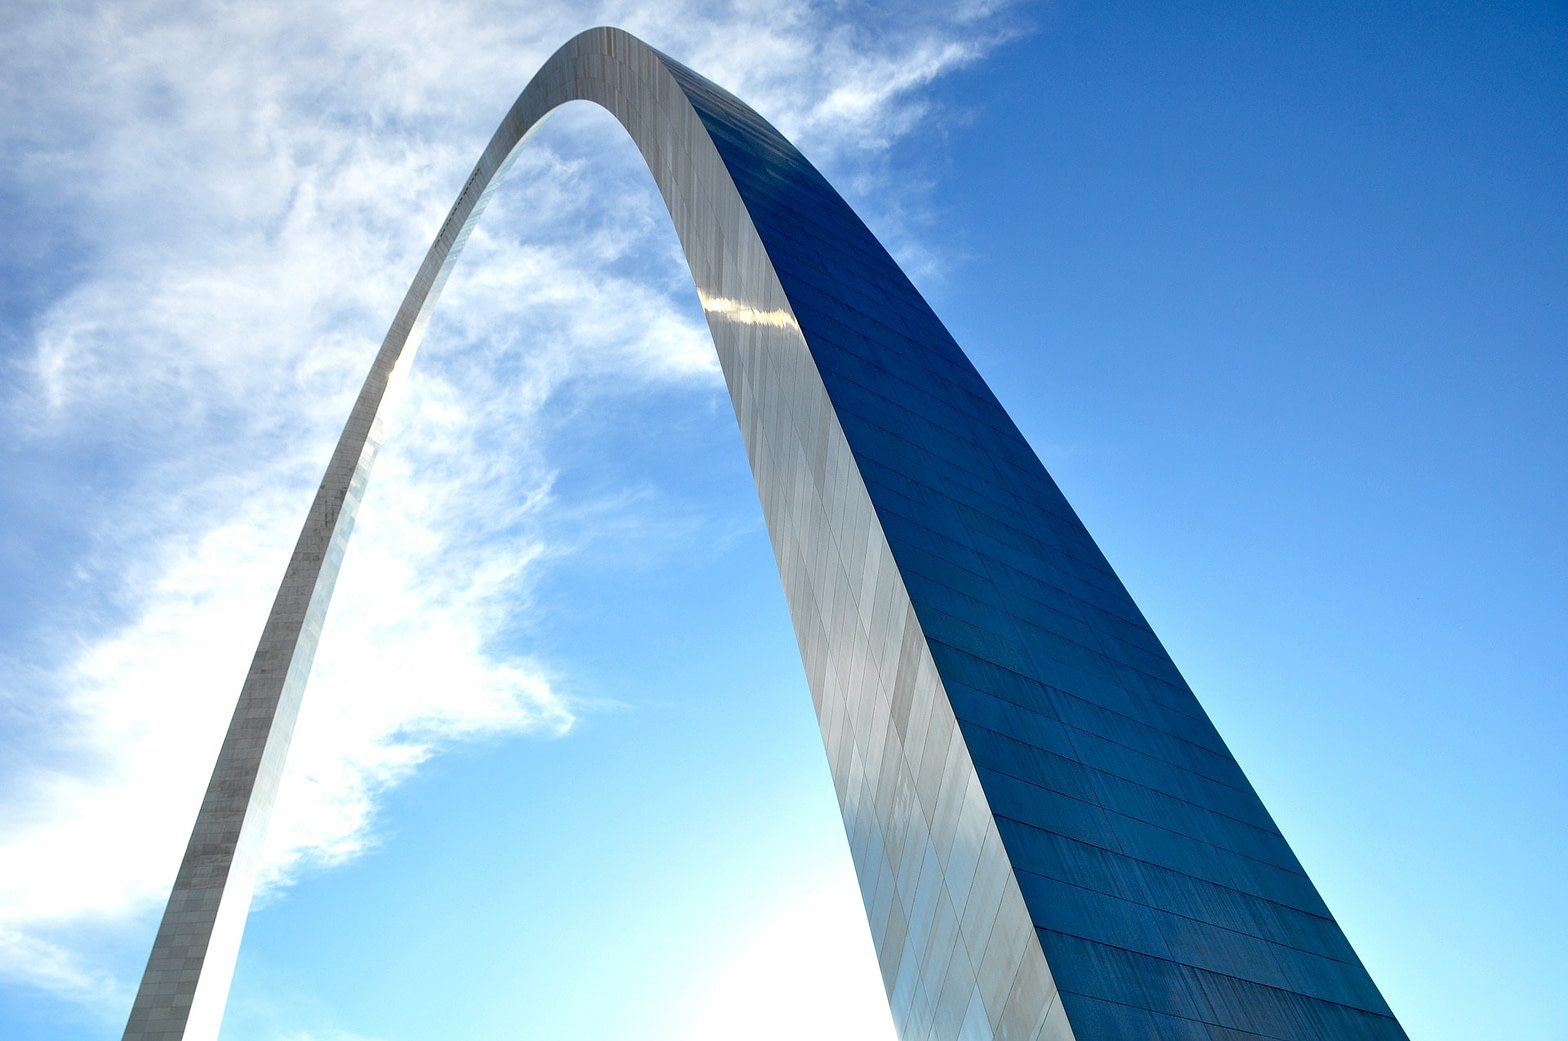 The Arch in St. Louis, Missouri.